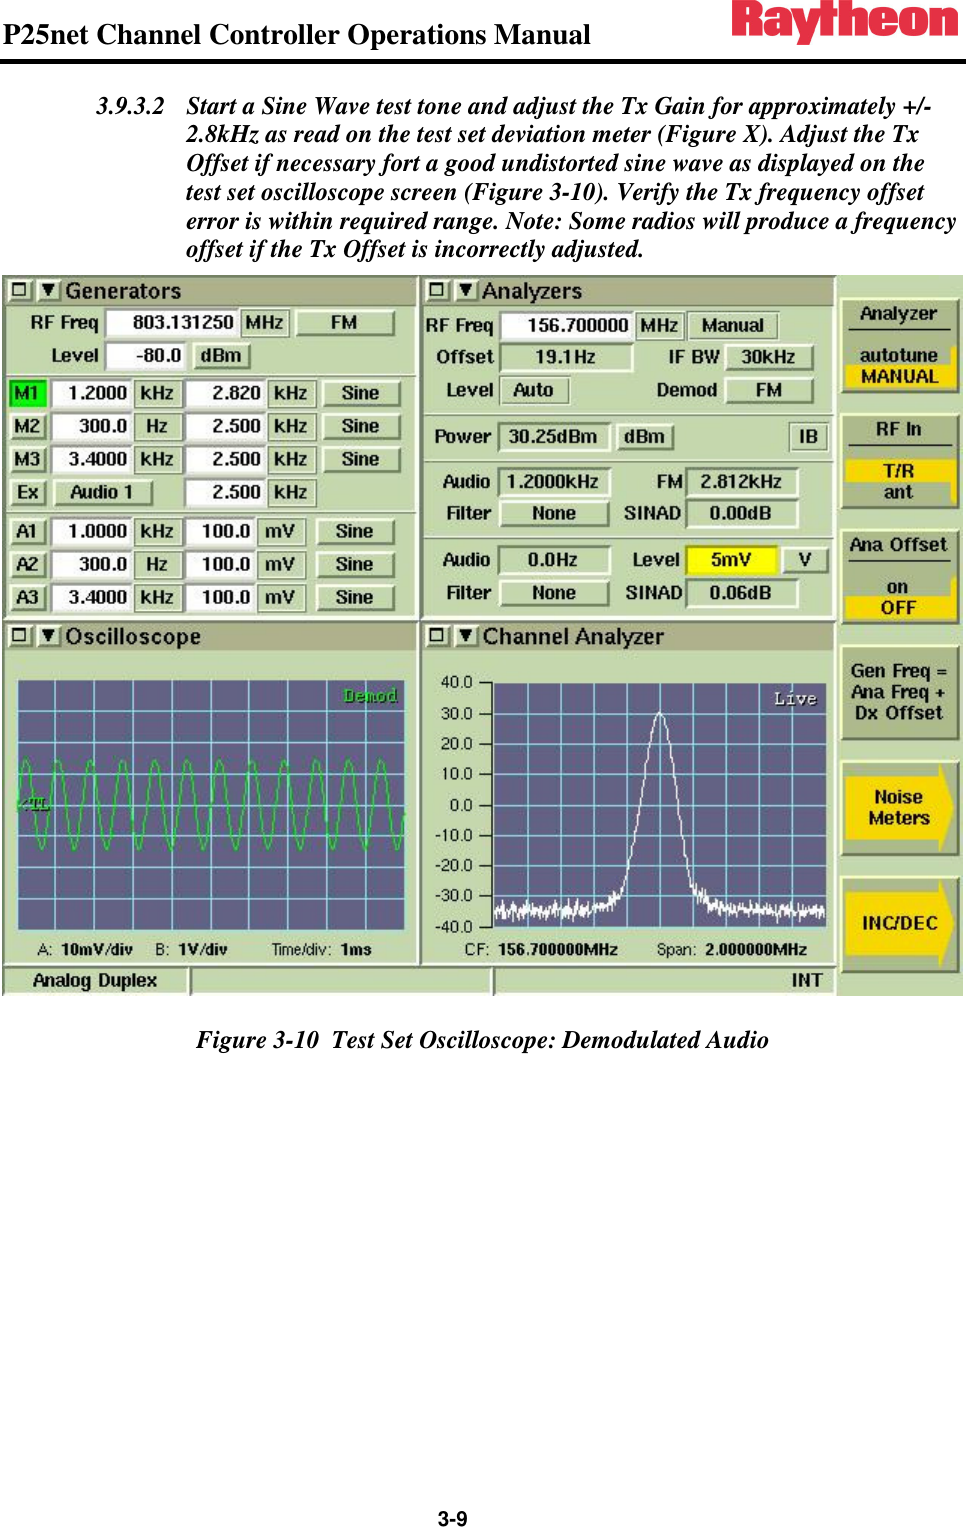 P25net Channel Controller Operations Manual                 3-9 3.9.3.2 Start a Sine Wave test tone and adjust the Tx Gain for approximately +/- 2.8kHz as read on the test set deviation meter (Figure X). Adjust the Tx Offset if necessary fort a good undistorted sine wave as displayed on the test set oscilloscope screen (Figure 3-10). Verify the Tx frequency offset error is within required range. Note: Some radios will produce a frequency offset if the Tx Offset is incorrectly adjusted.  Figure 3-10  Test Set Oscilloscope: Demodulated Audio 